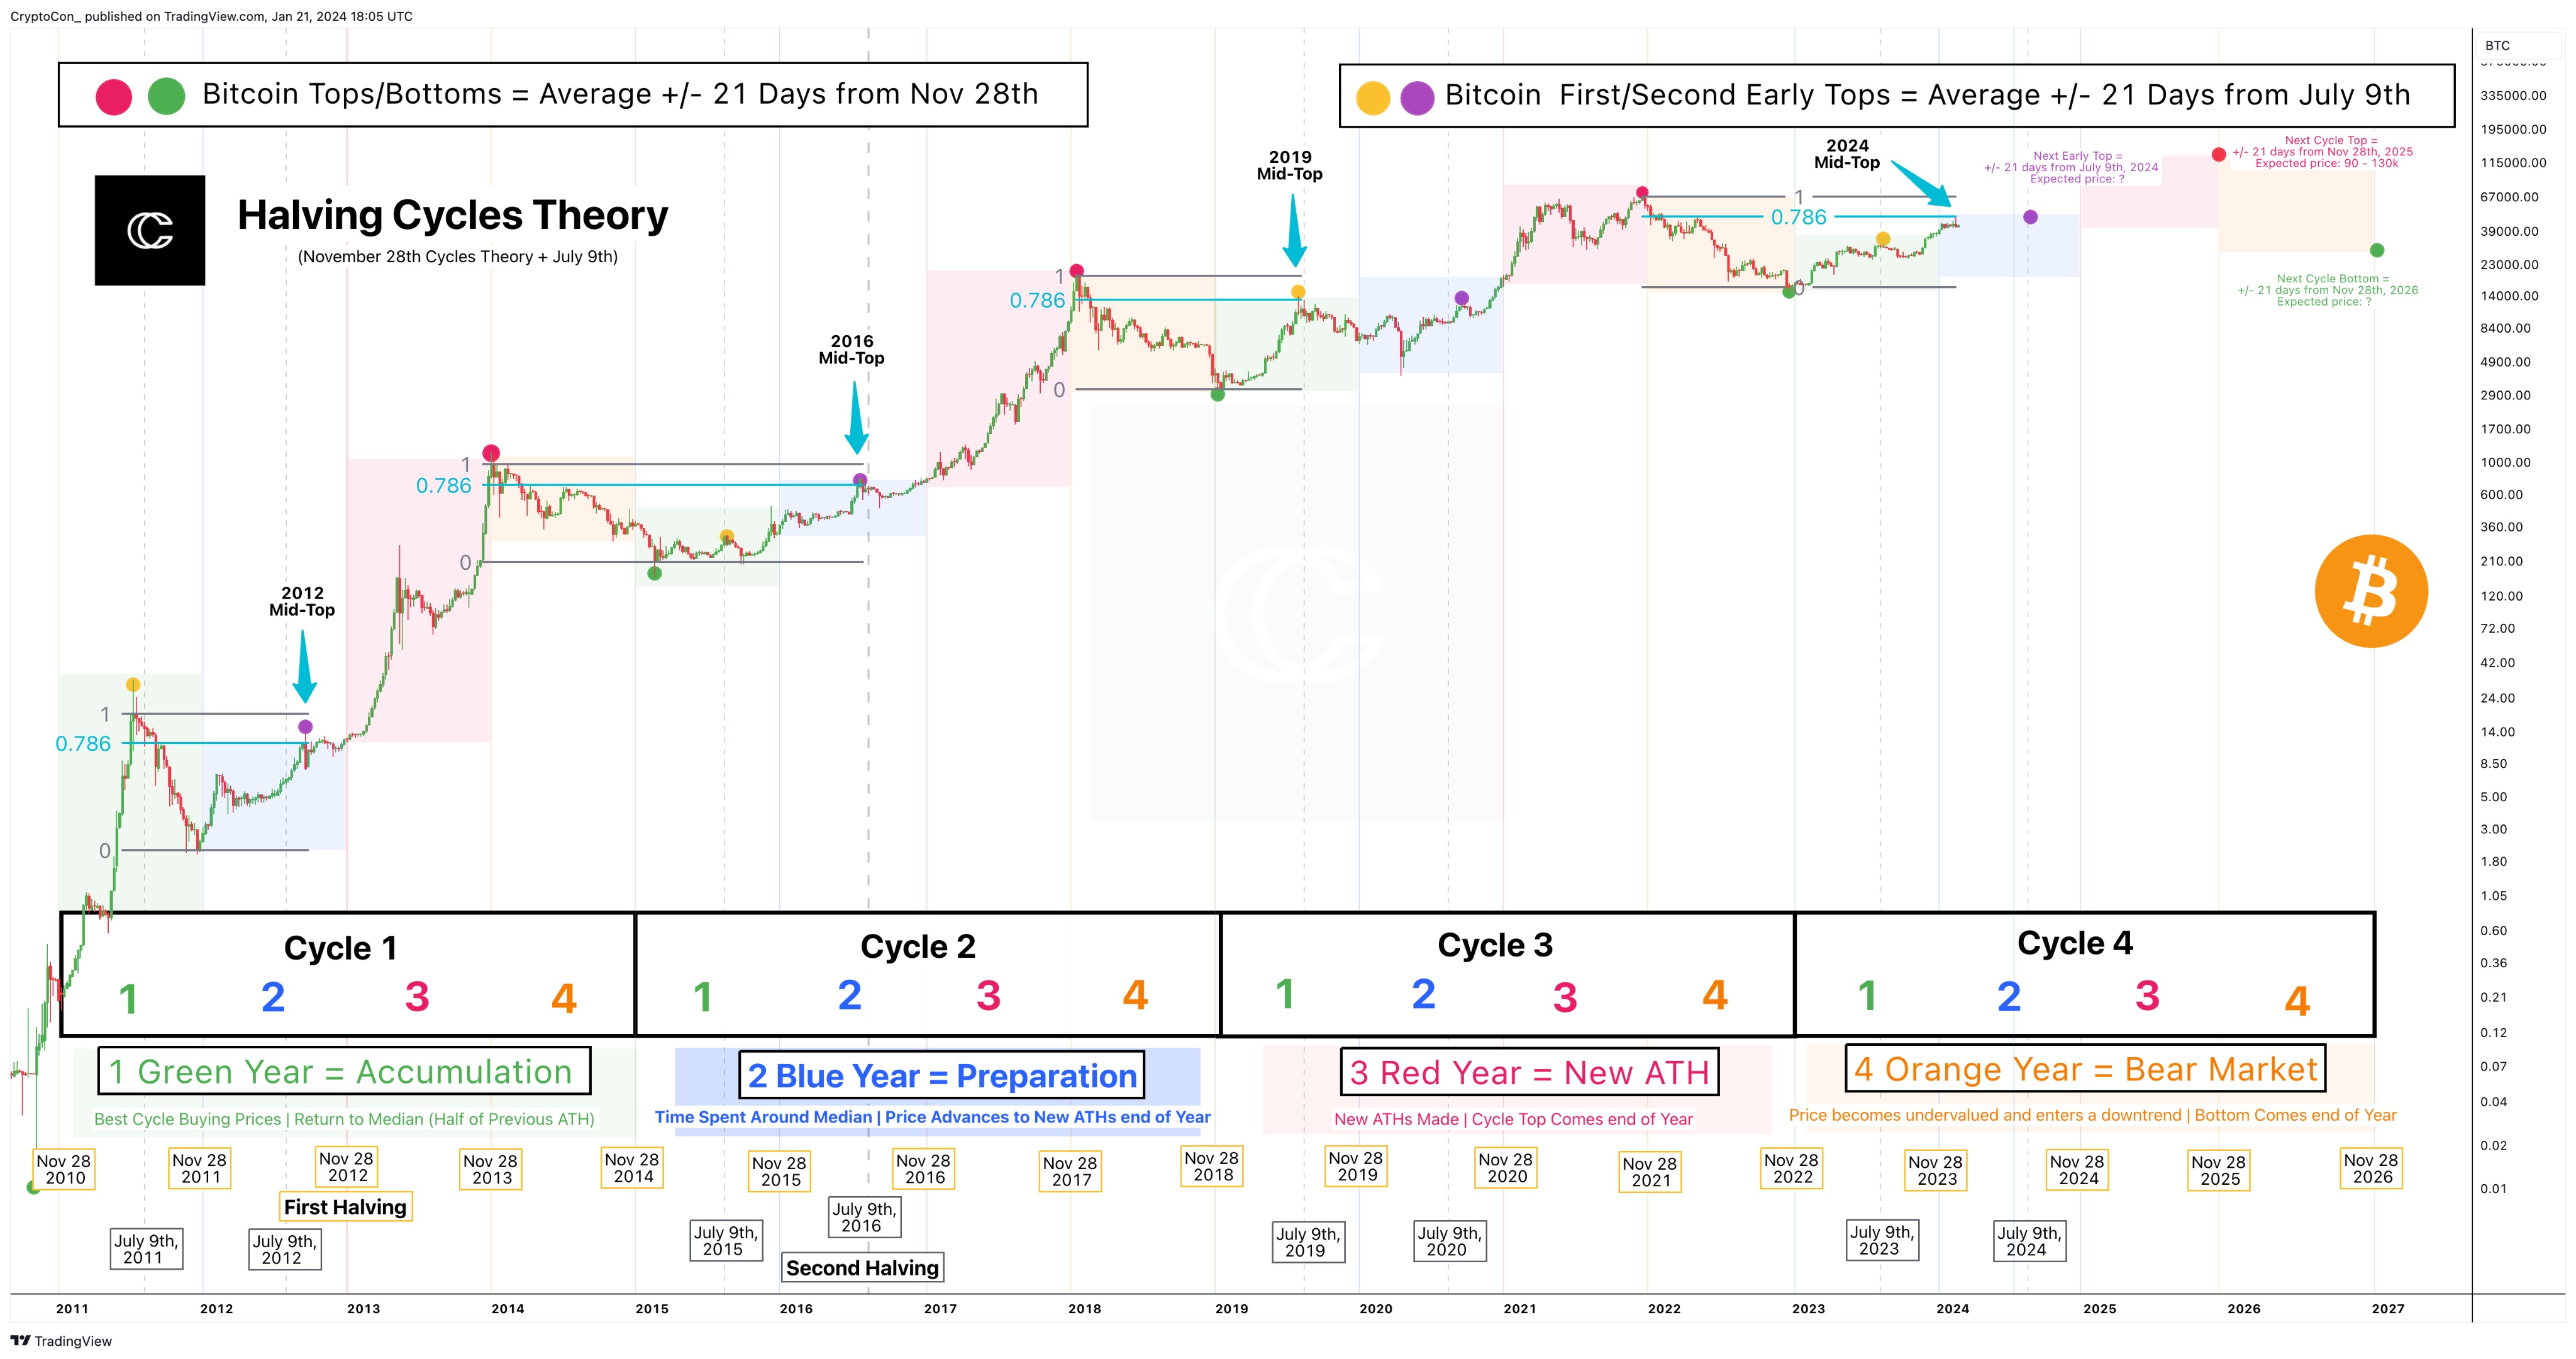 BTC is currently at the mid-top based on the historical halving cycles theory.